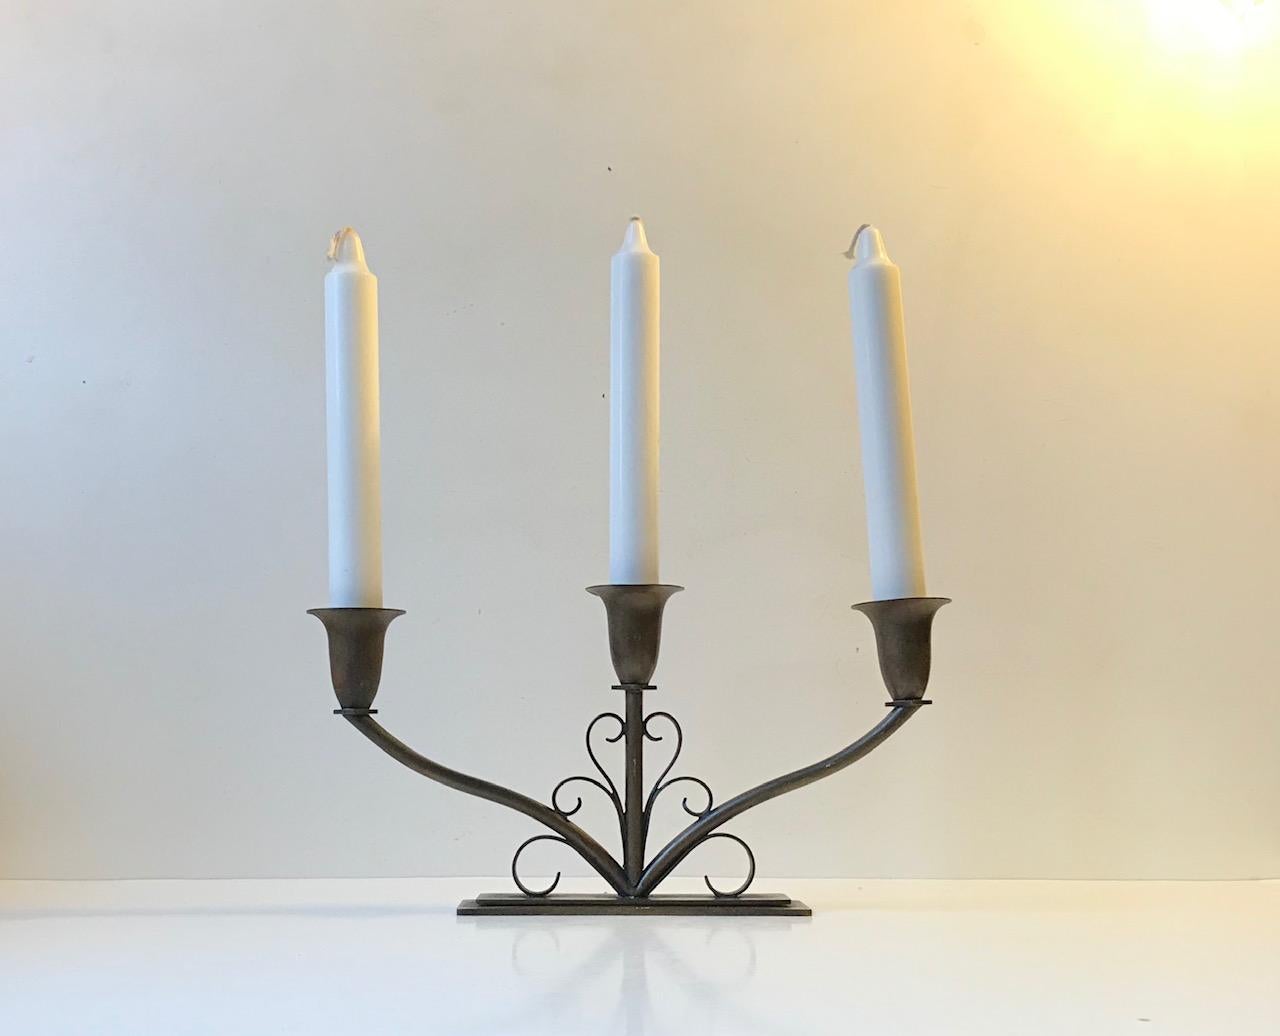 Balanced, stylized patinated bronze candelabra designed by Holger Fredericia and manufactured by Ildfast in Denmark during the early 1930s. Architecturally 'staired' base measuring 5 cm in dept. Is to fitted with 3 regular sized candles.